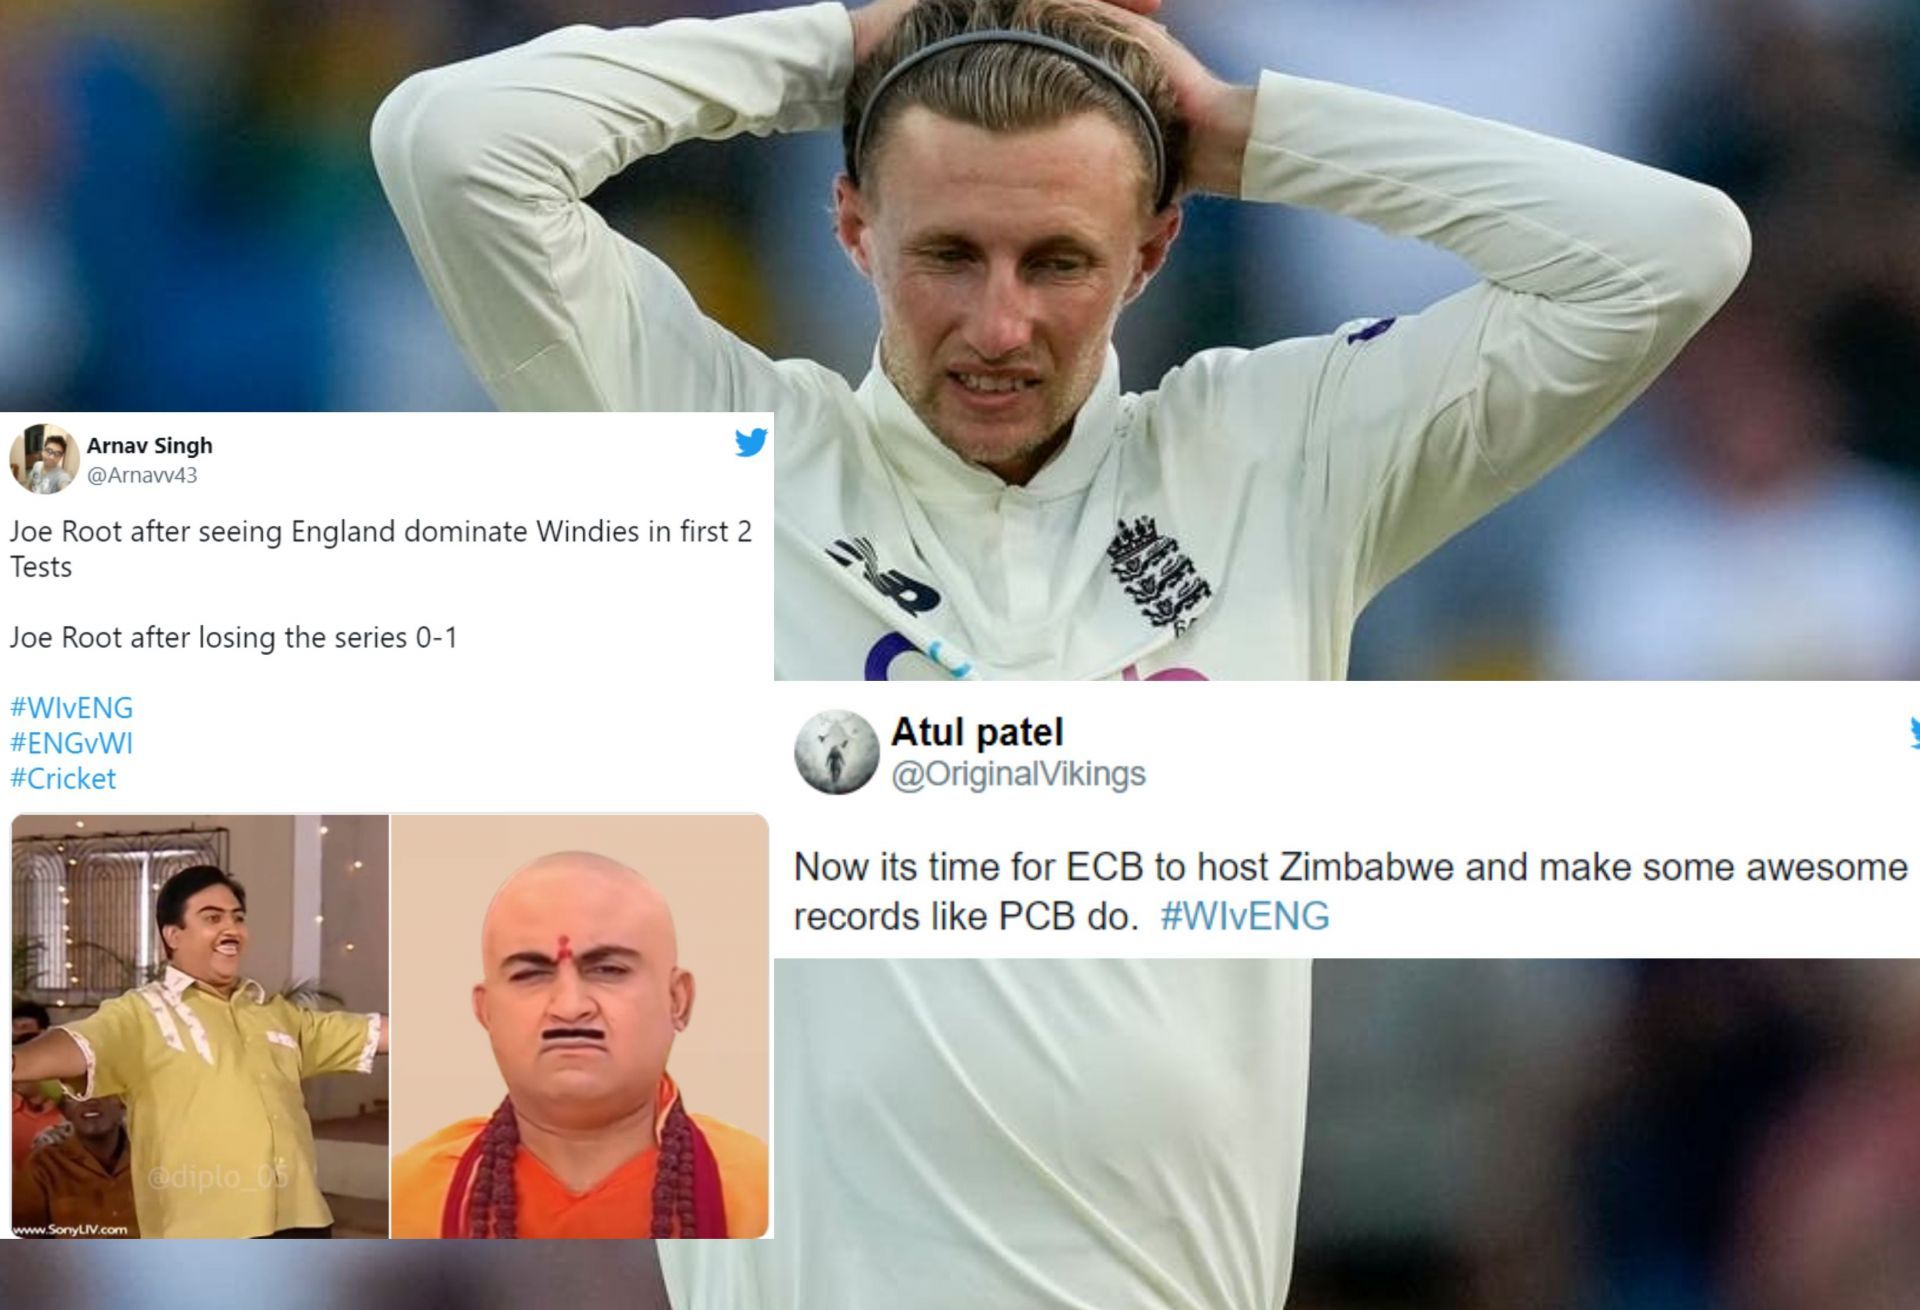 Twitterati calls for sacking of Joe Root from England captaincy